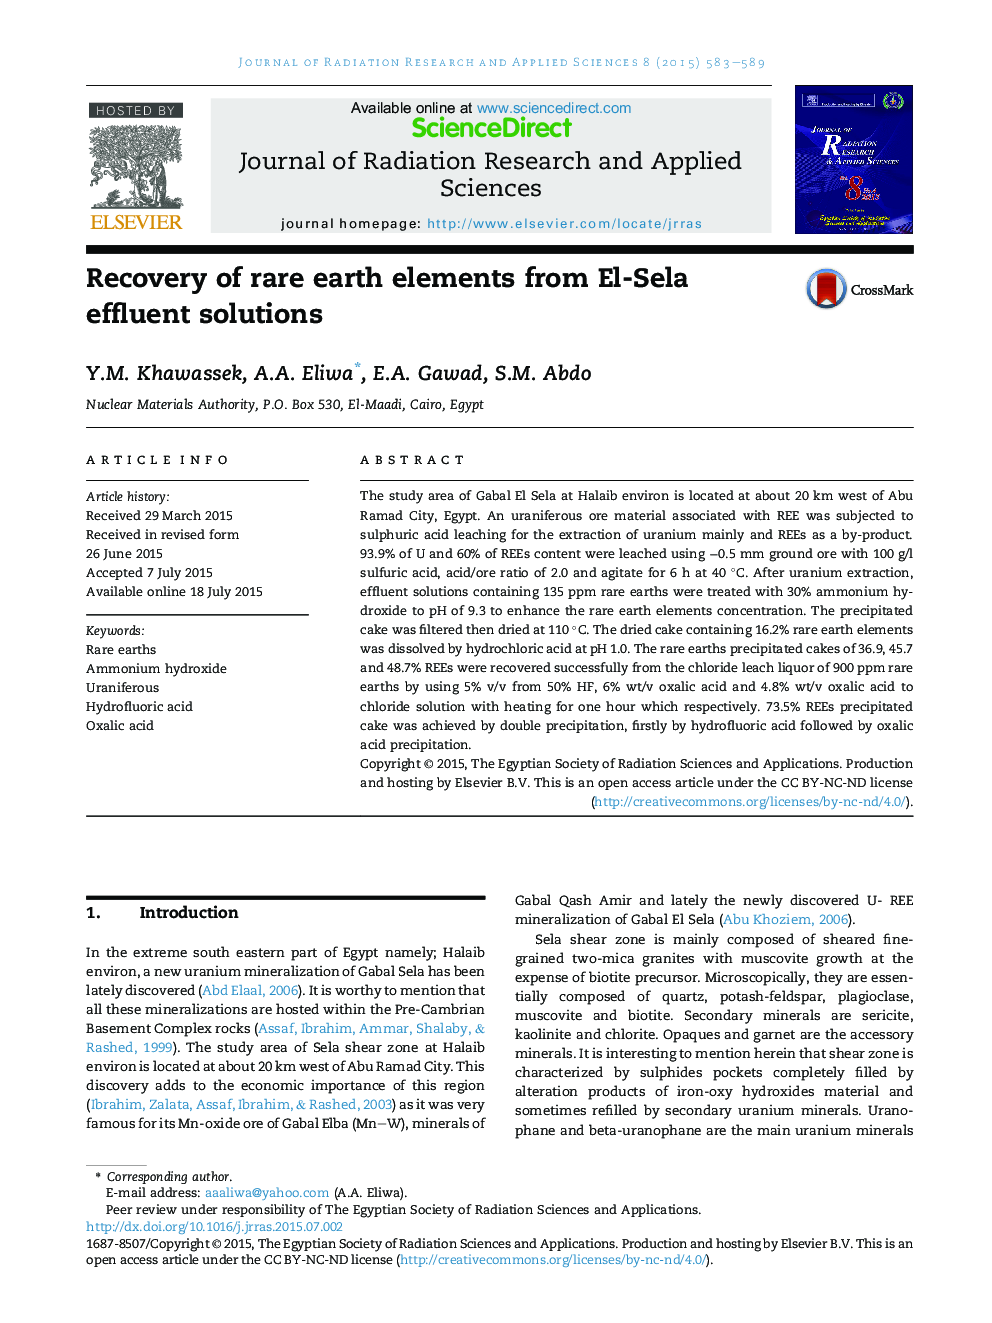 Recovery of rare earth elements from El-Sela effluent solutions 